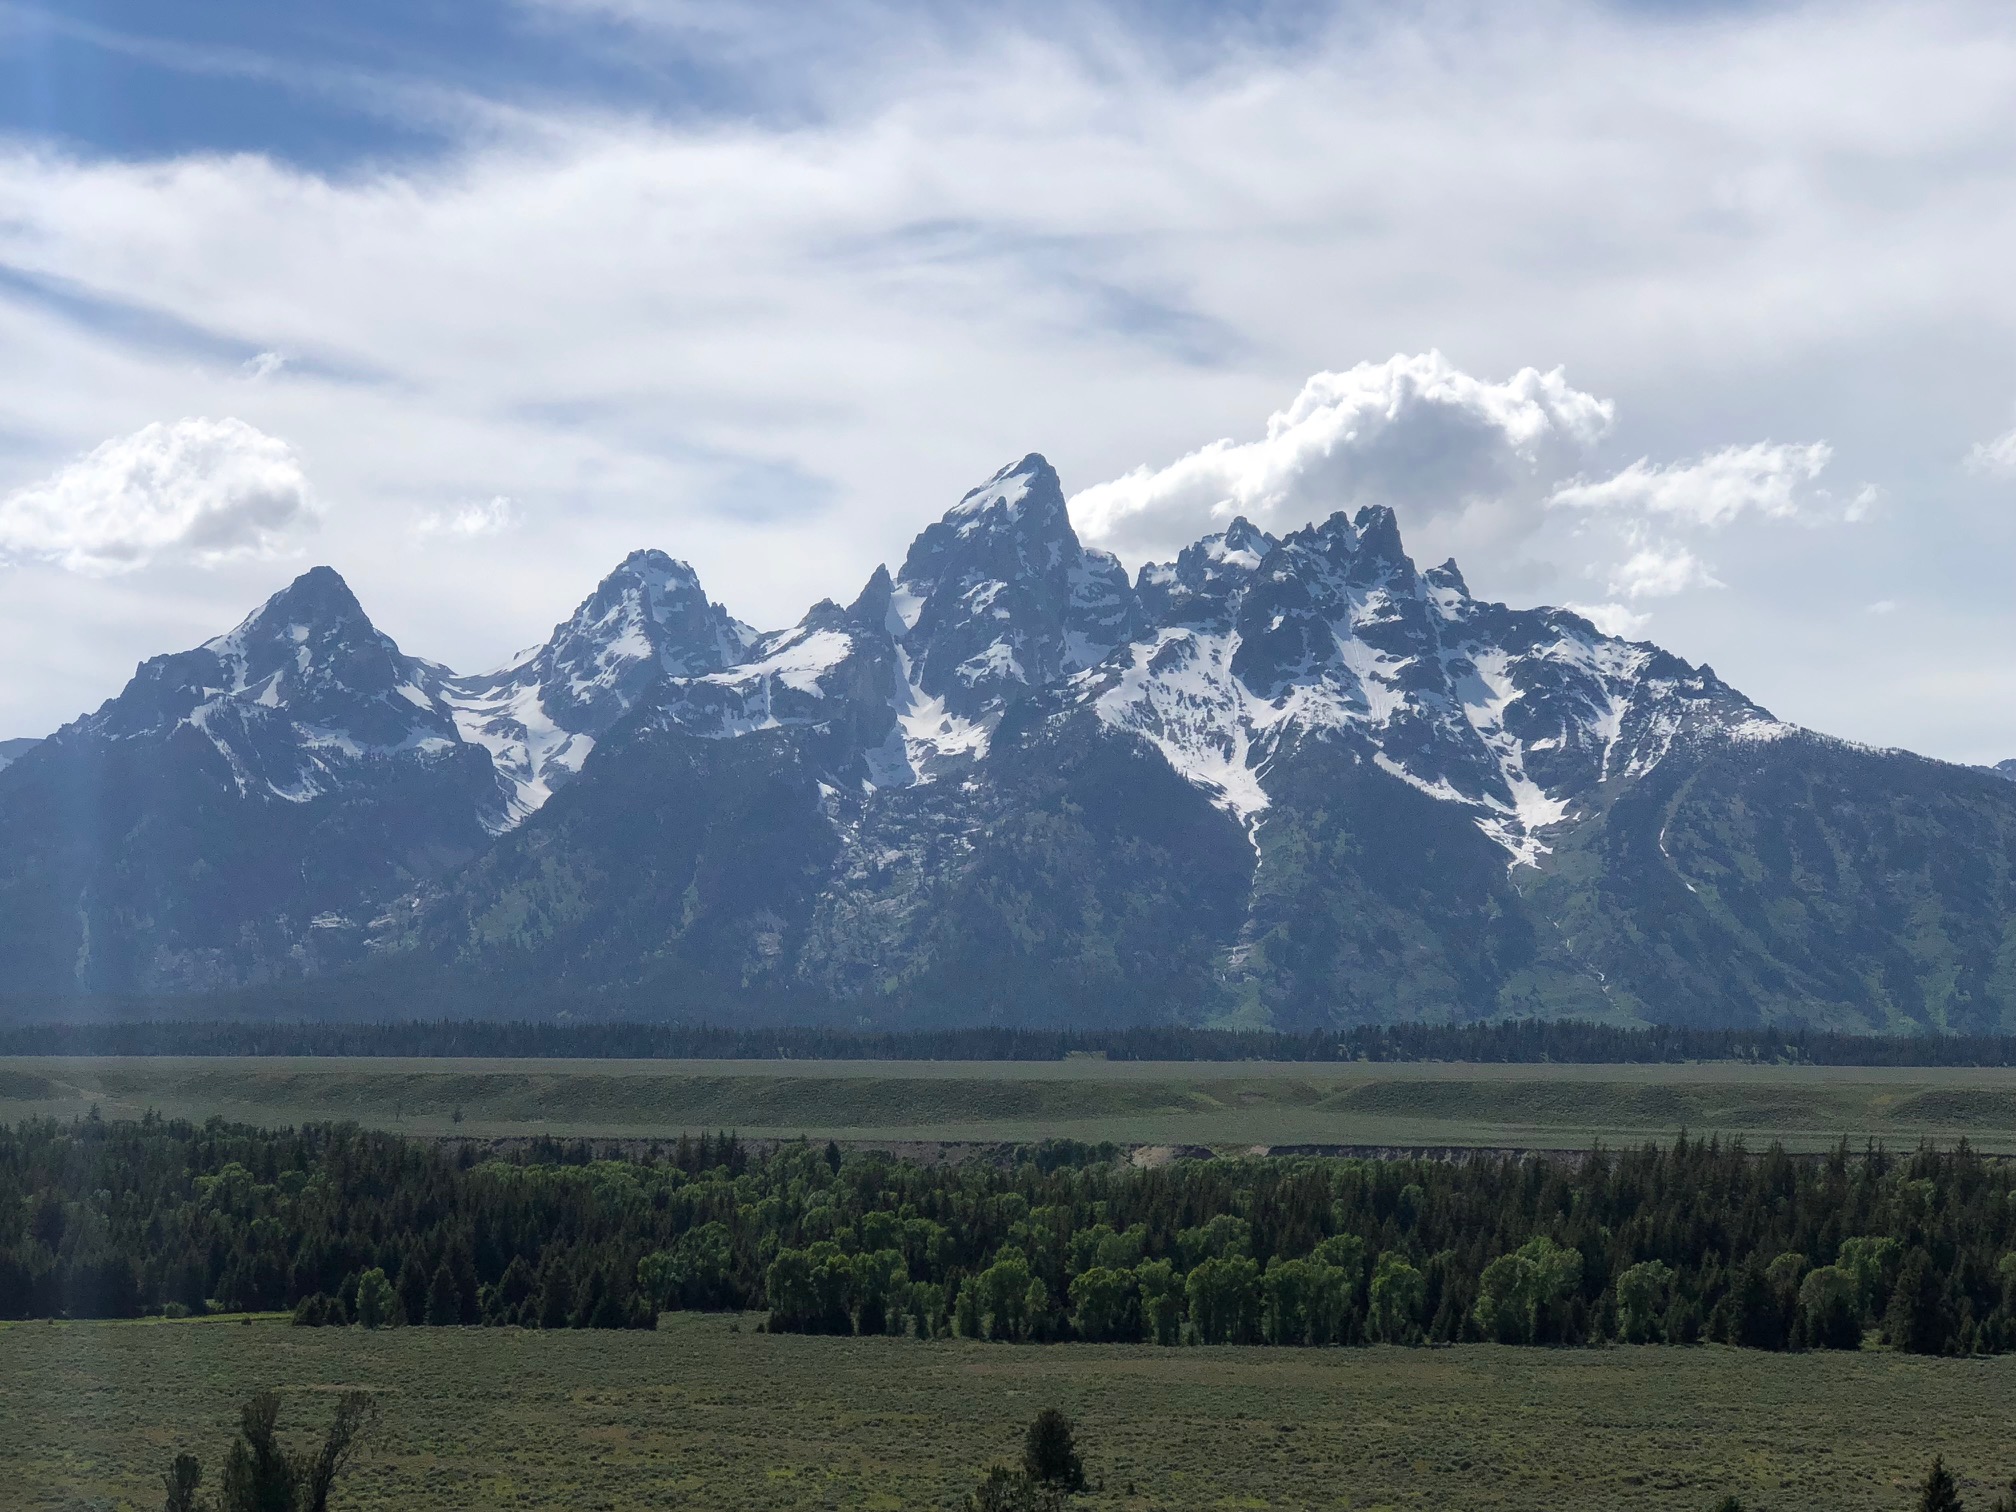 Teton National Park will be getting better bicycle access soon. Photo by Dave Iltis